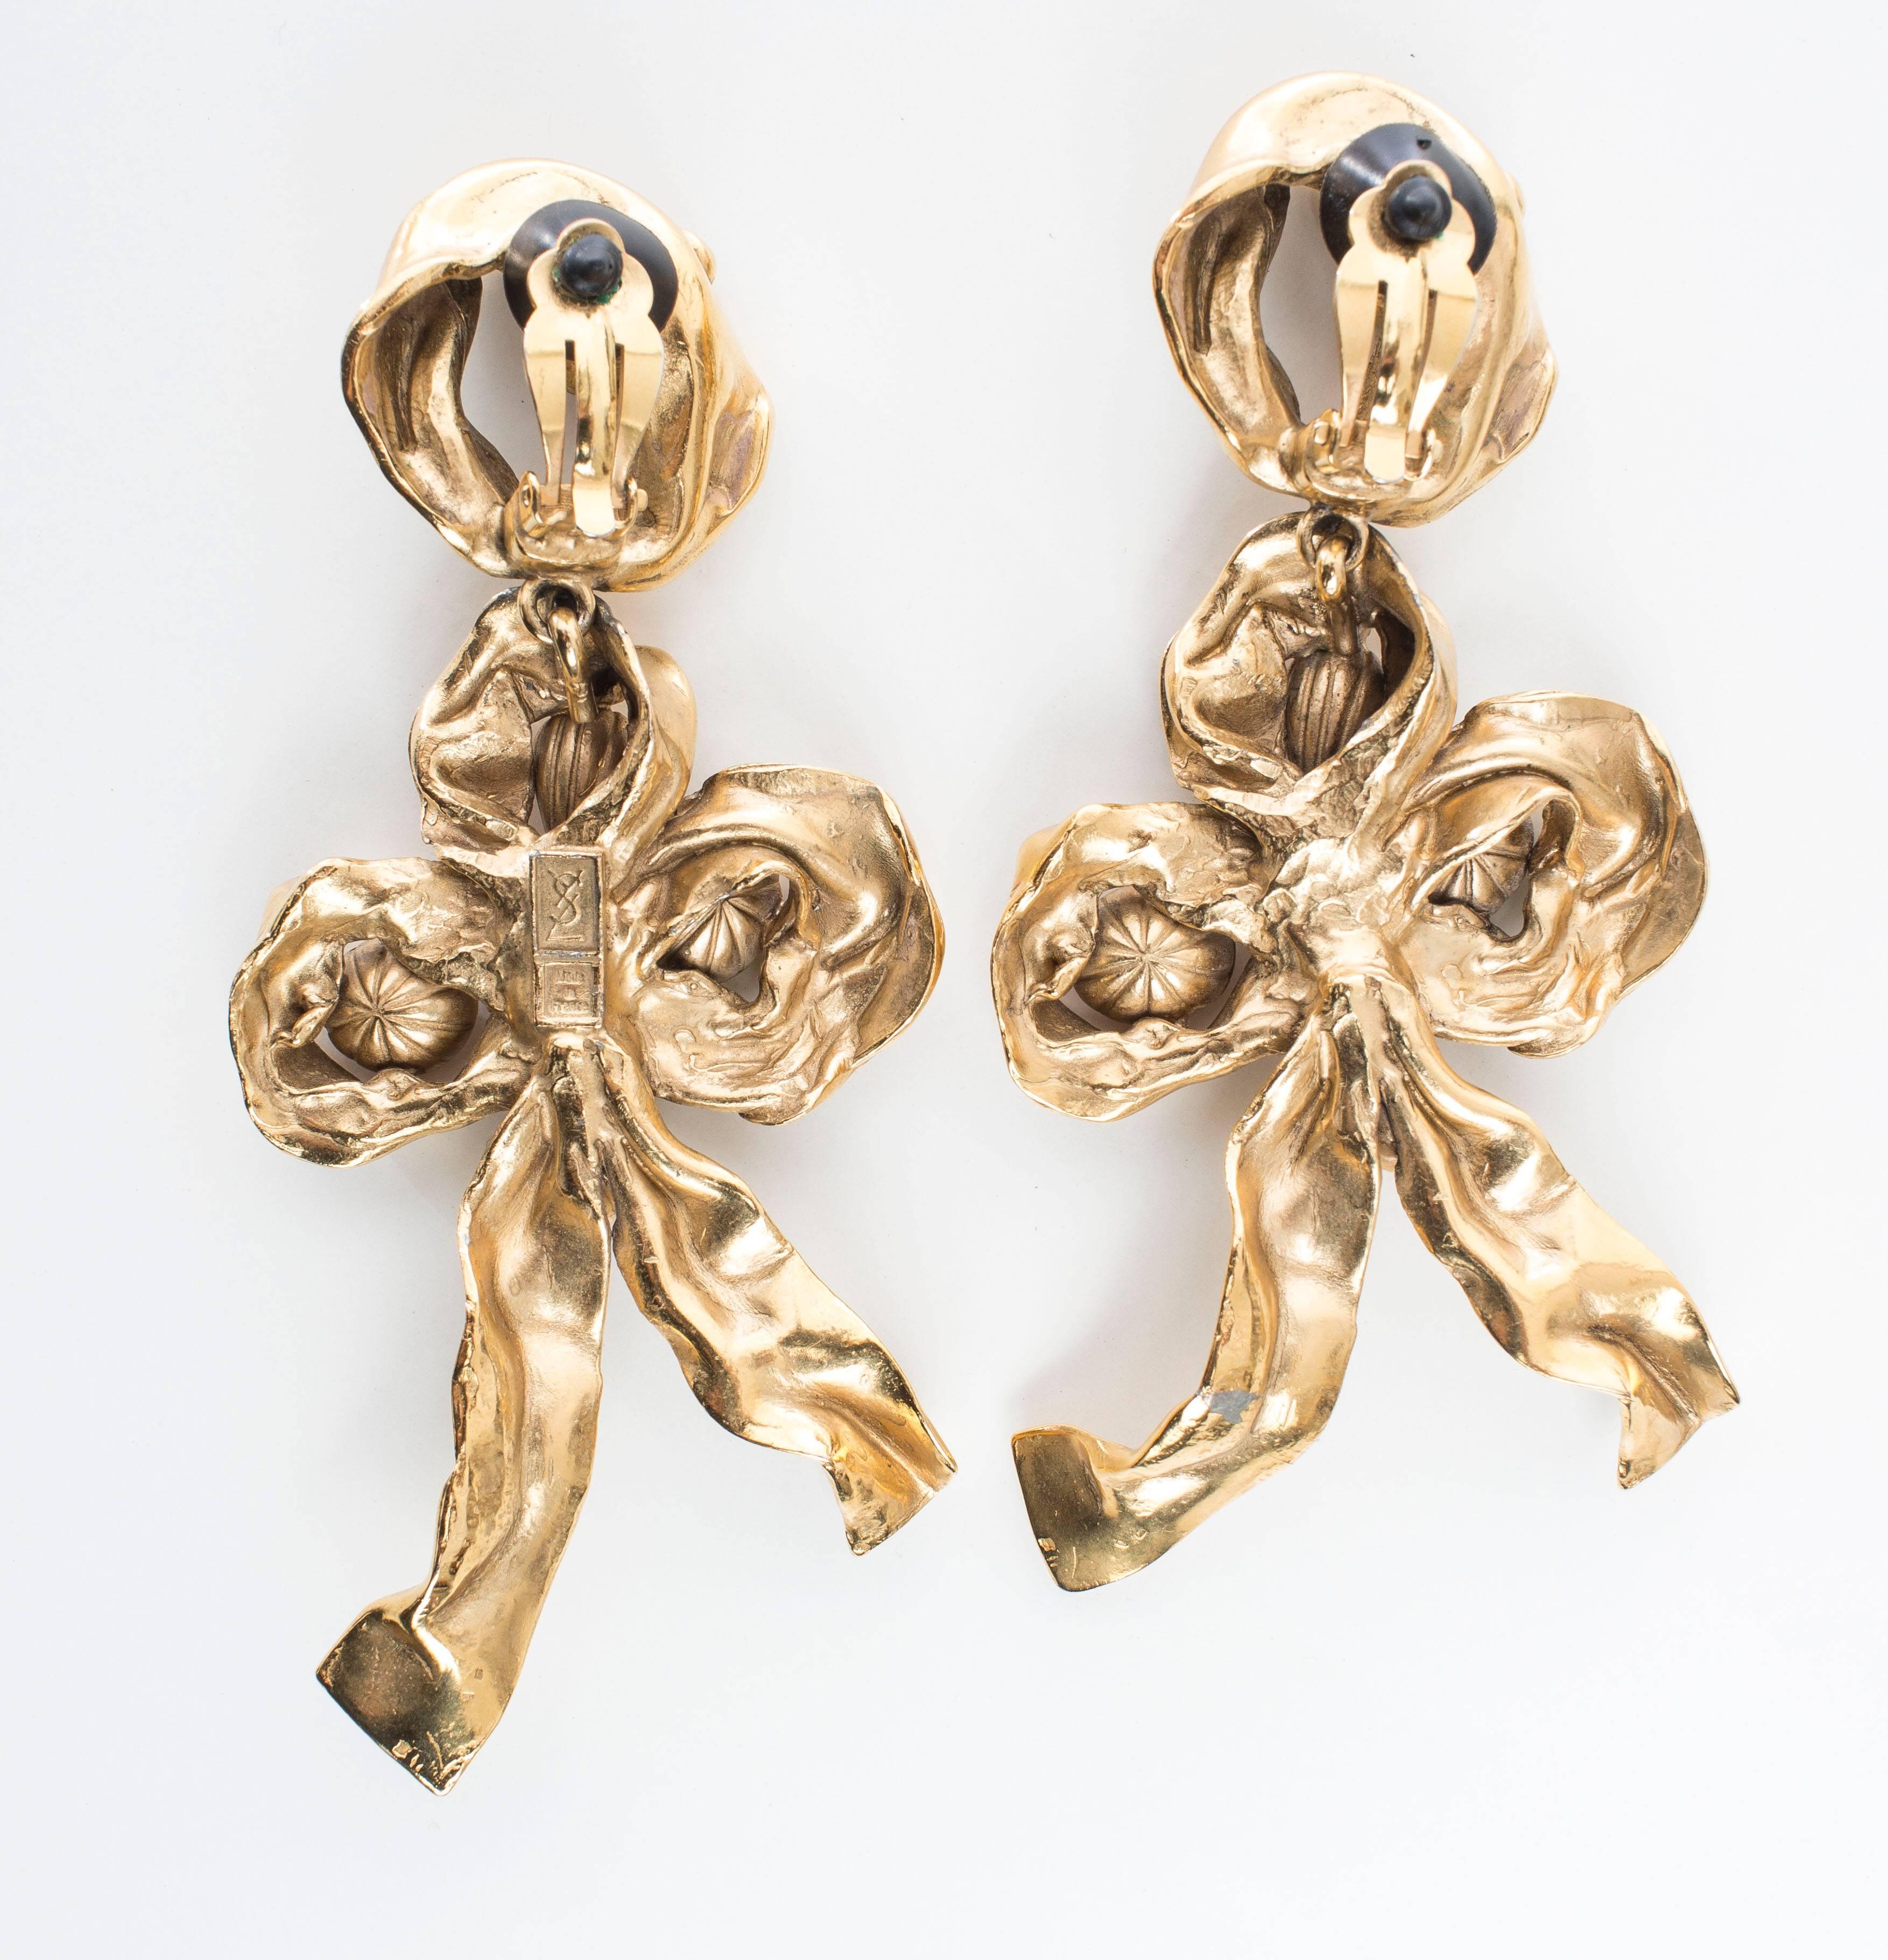 Yves Saint Laurent Massive Gilt Leaf Earrings With Faceted Stones, Circa 1980's In Excellent Condition For Sale In Cincinnati, OH